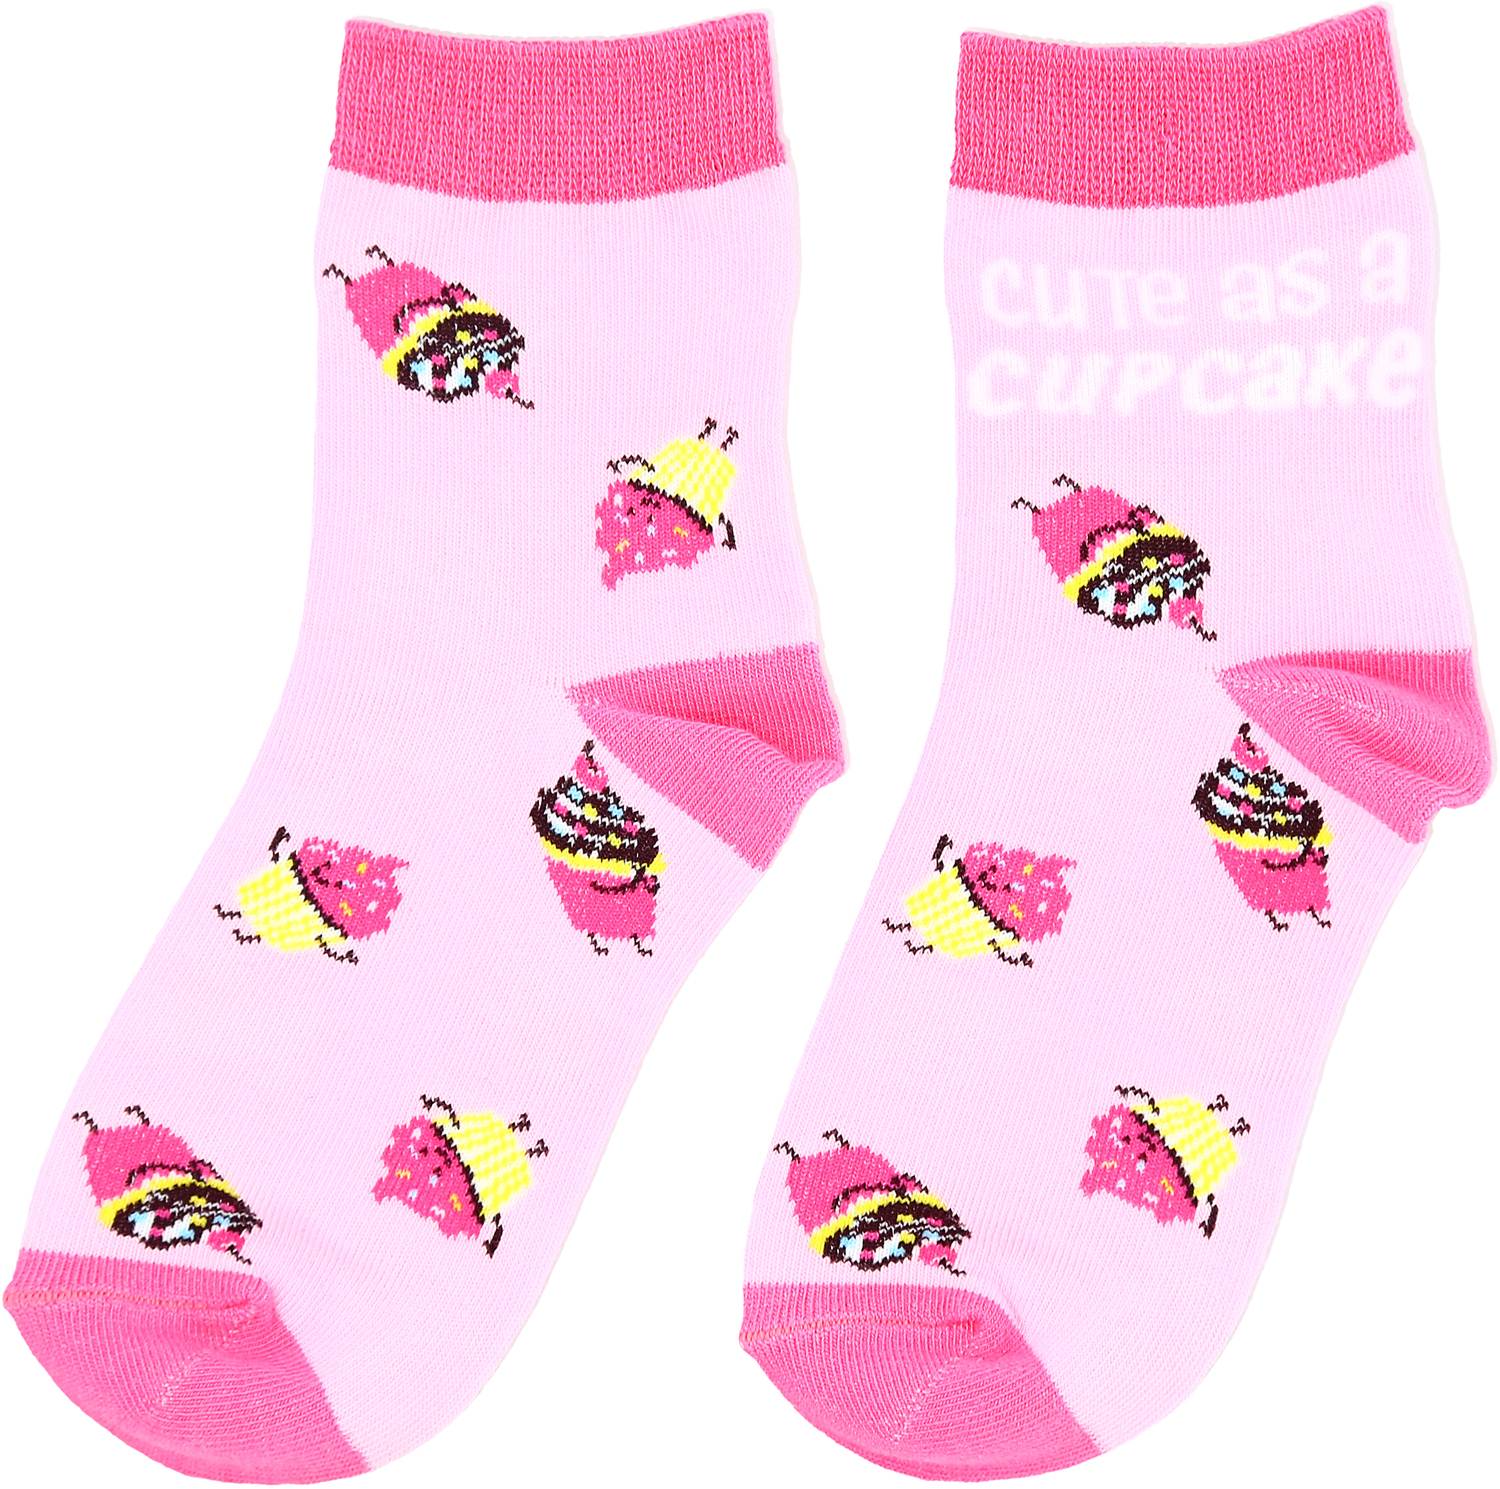 Cupcakes by Late Night Snacks - Cupcakes - S/M Youth Cotton Blend Crew Socks